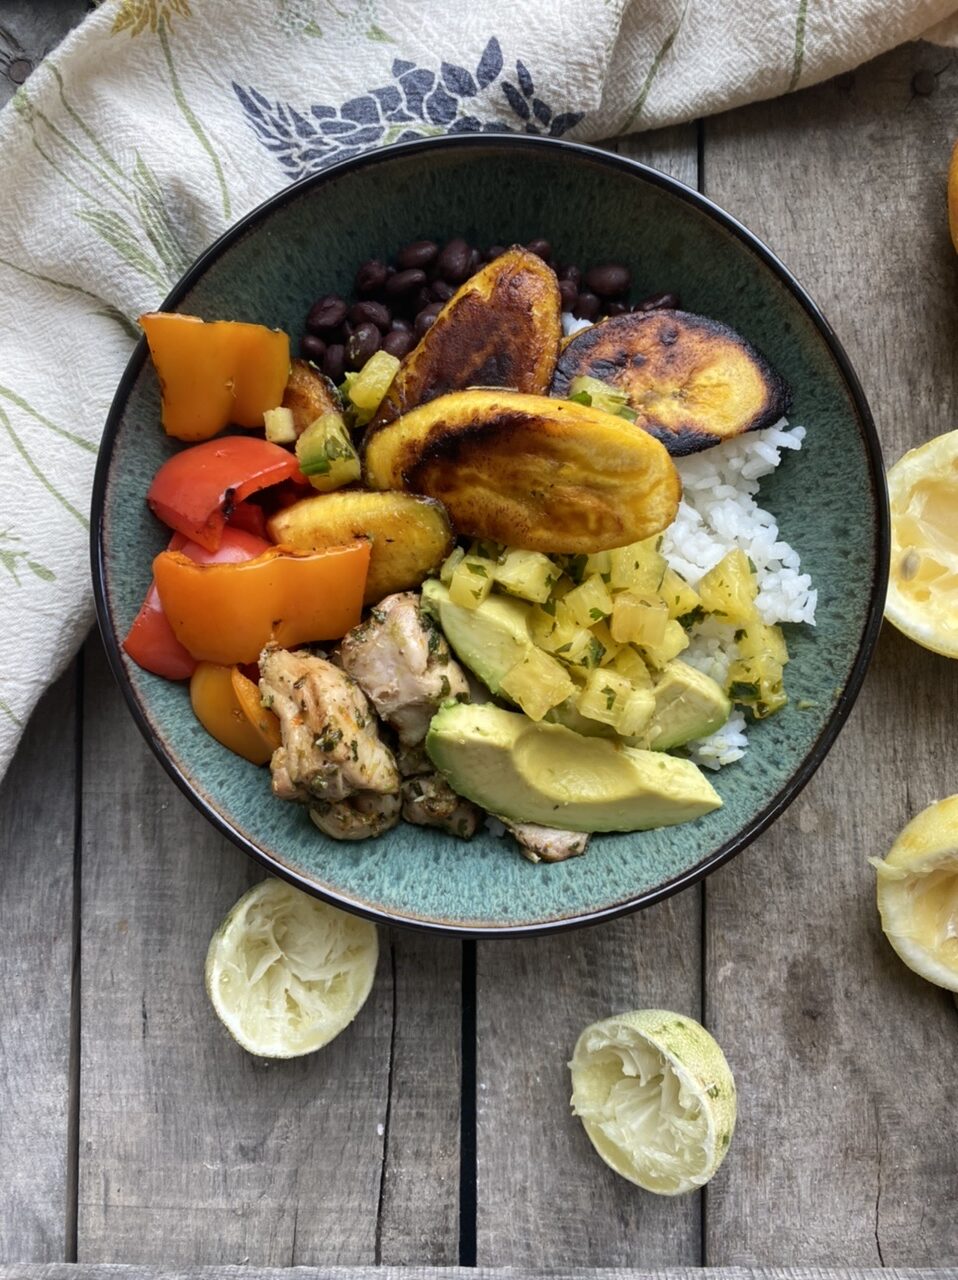 3C5A7558 065E 4029 ACC8 1A03C4611593 e1622645279260 - Cuban Chicken Mojo Bowls with Grilled Bell Peppers, Fried Plantains, & Pineapple Salsa